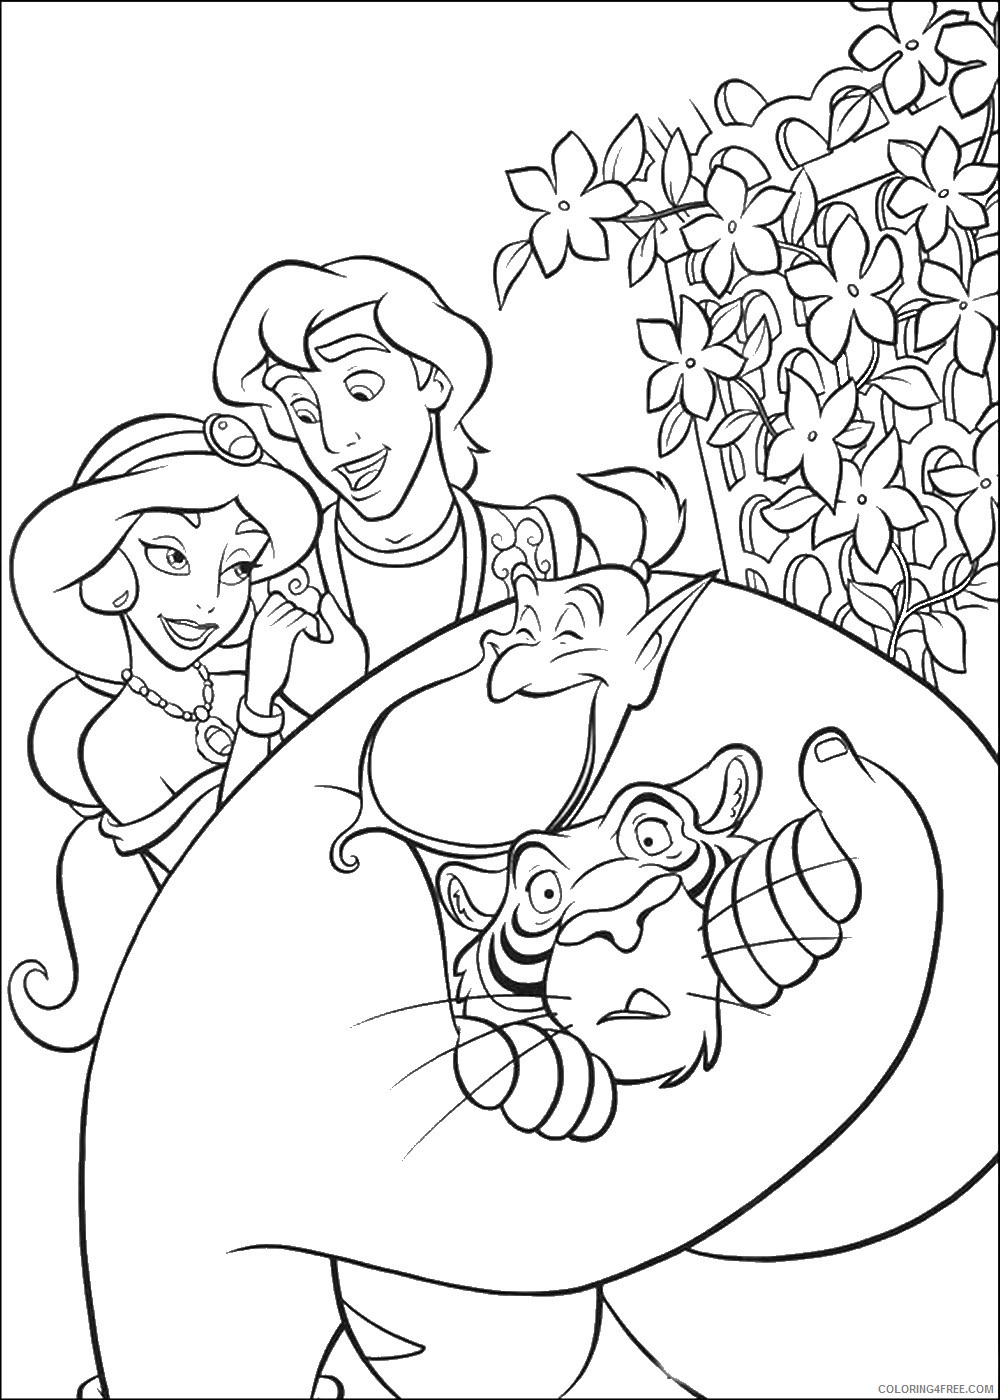 Aladdin Coloring Pages Cartoons aladdin_04 Printable 2020 0284 Coloring4free